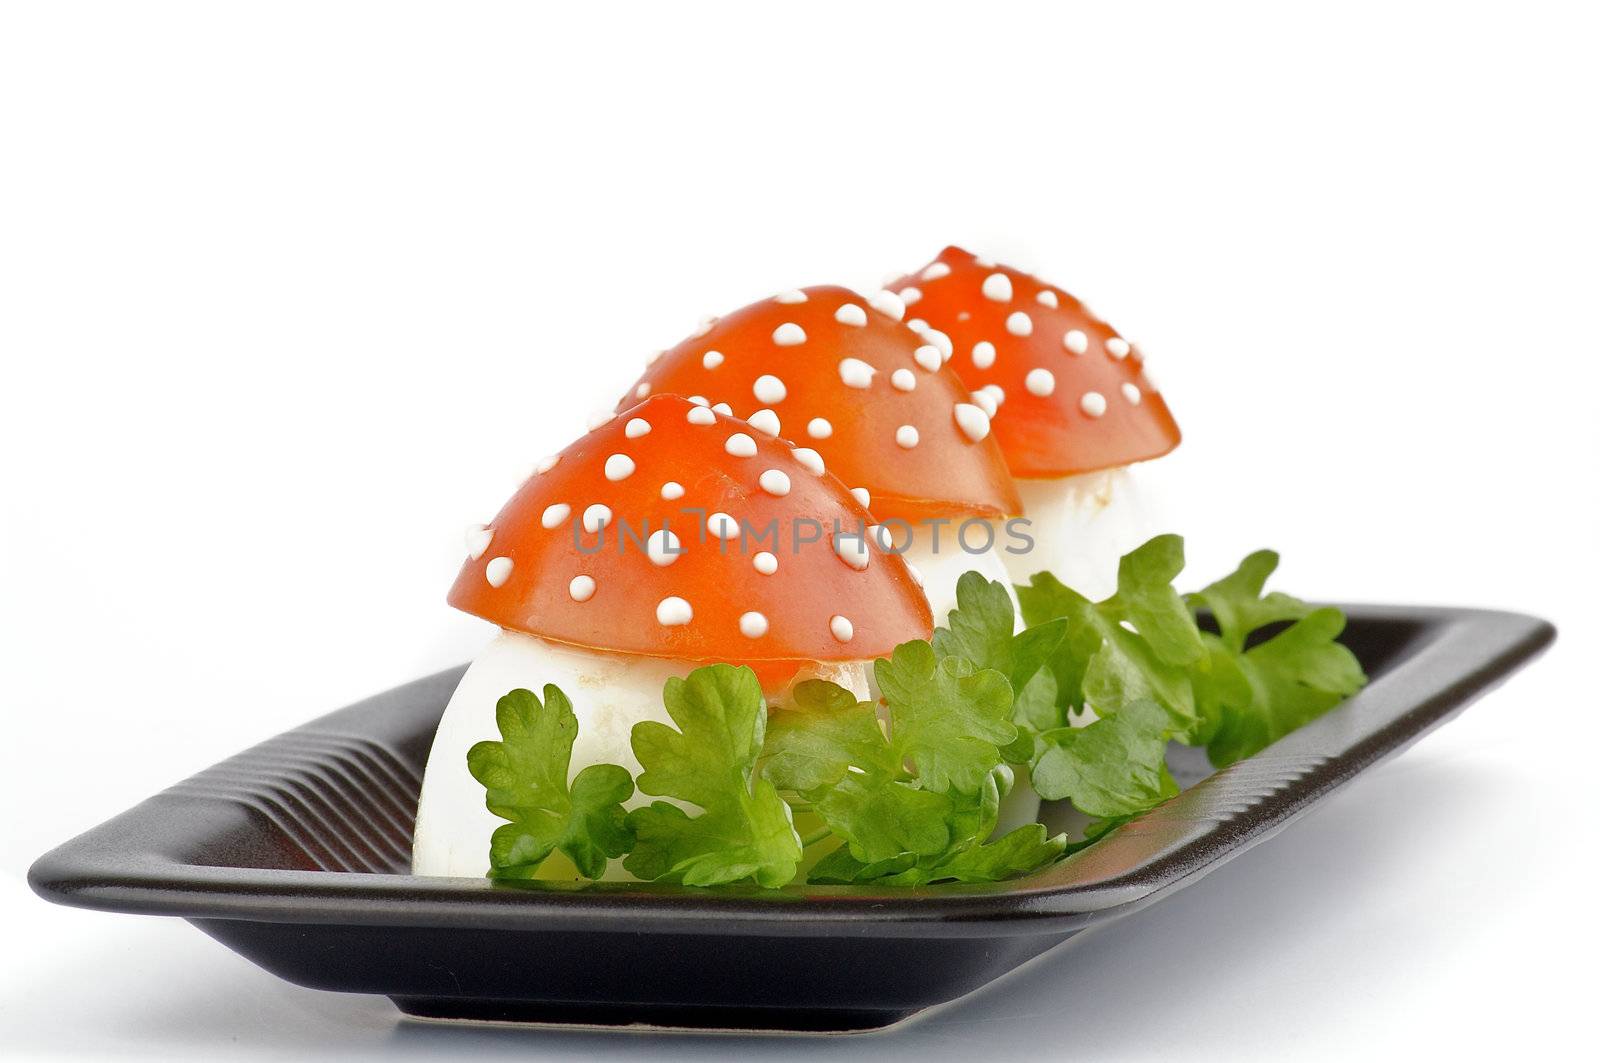 Fly mushroom formed from boiled egg, cover with the tomato mayonnaise. Funny food for children or party.